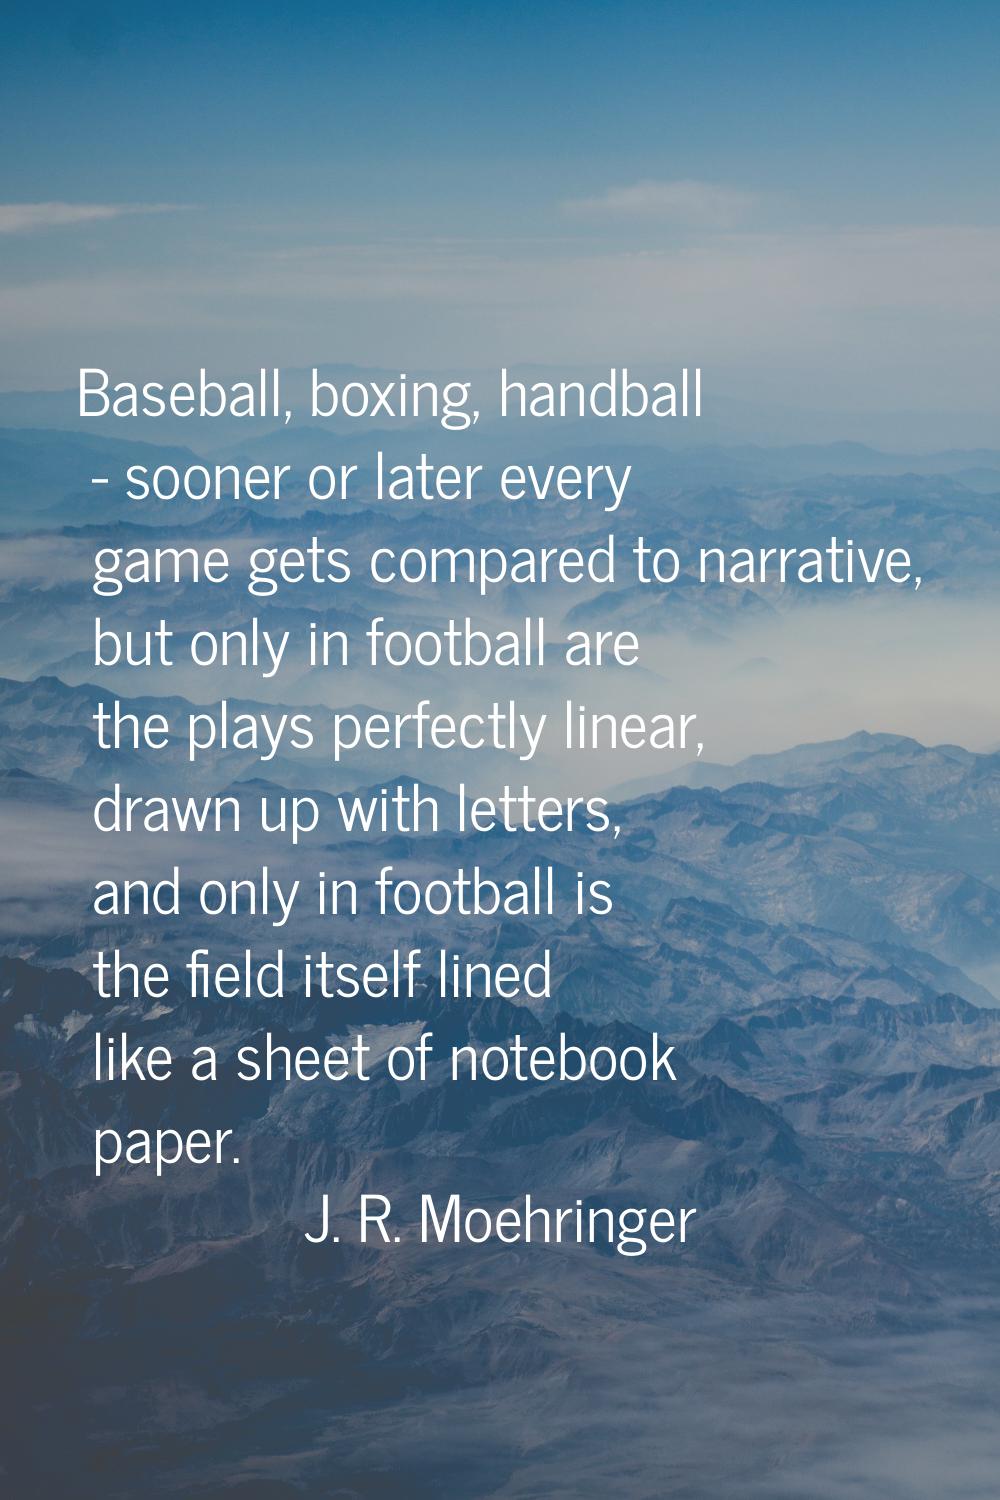 Baseball, boxing, handball - sooner or later every game gets compared to narrative, but only in foo